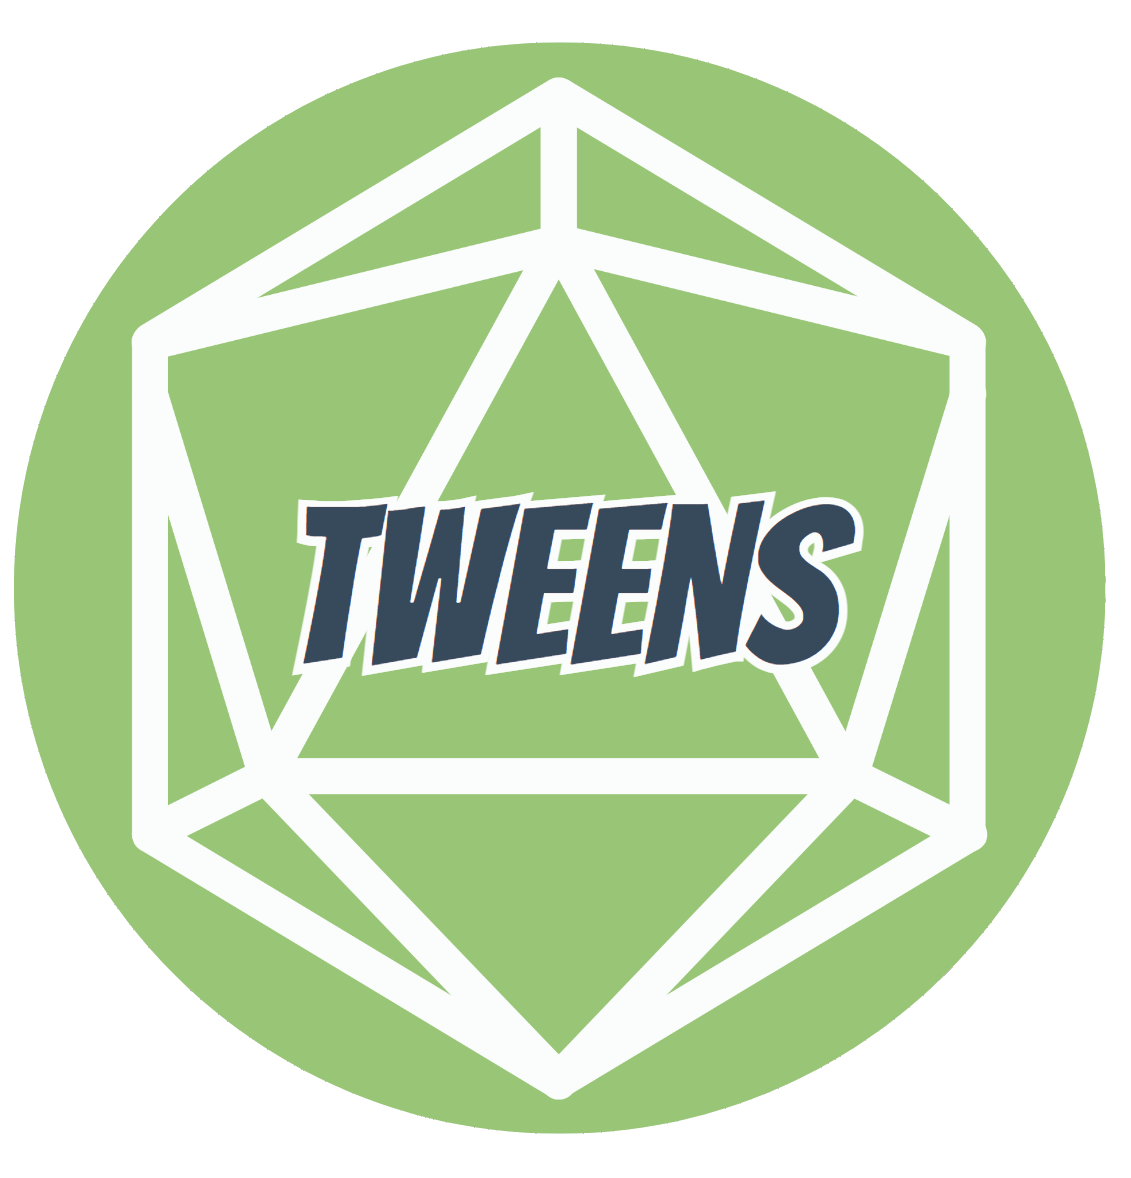 A green circle with a white d20 logo over it. The word "tweens" is written in blue font.